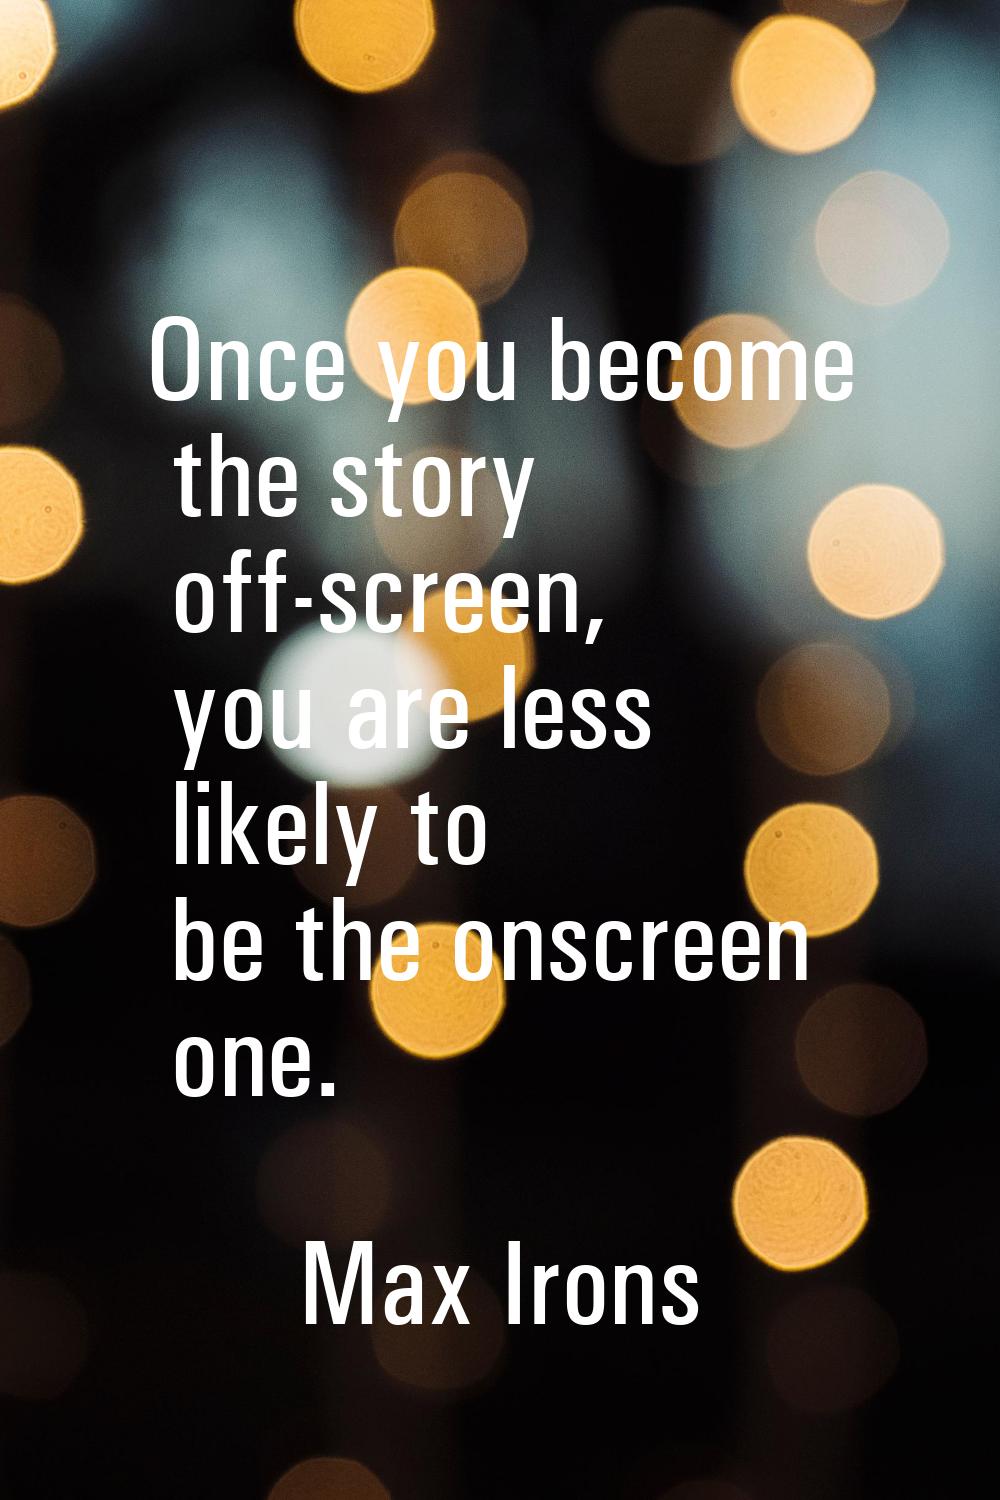 Once you become the story off-screen, you are less likely to be the onscreen one.